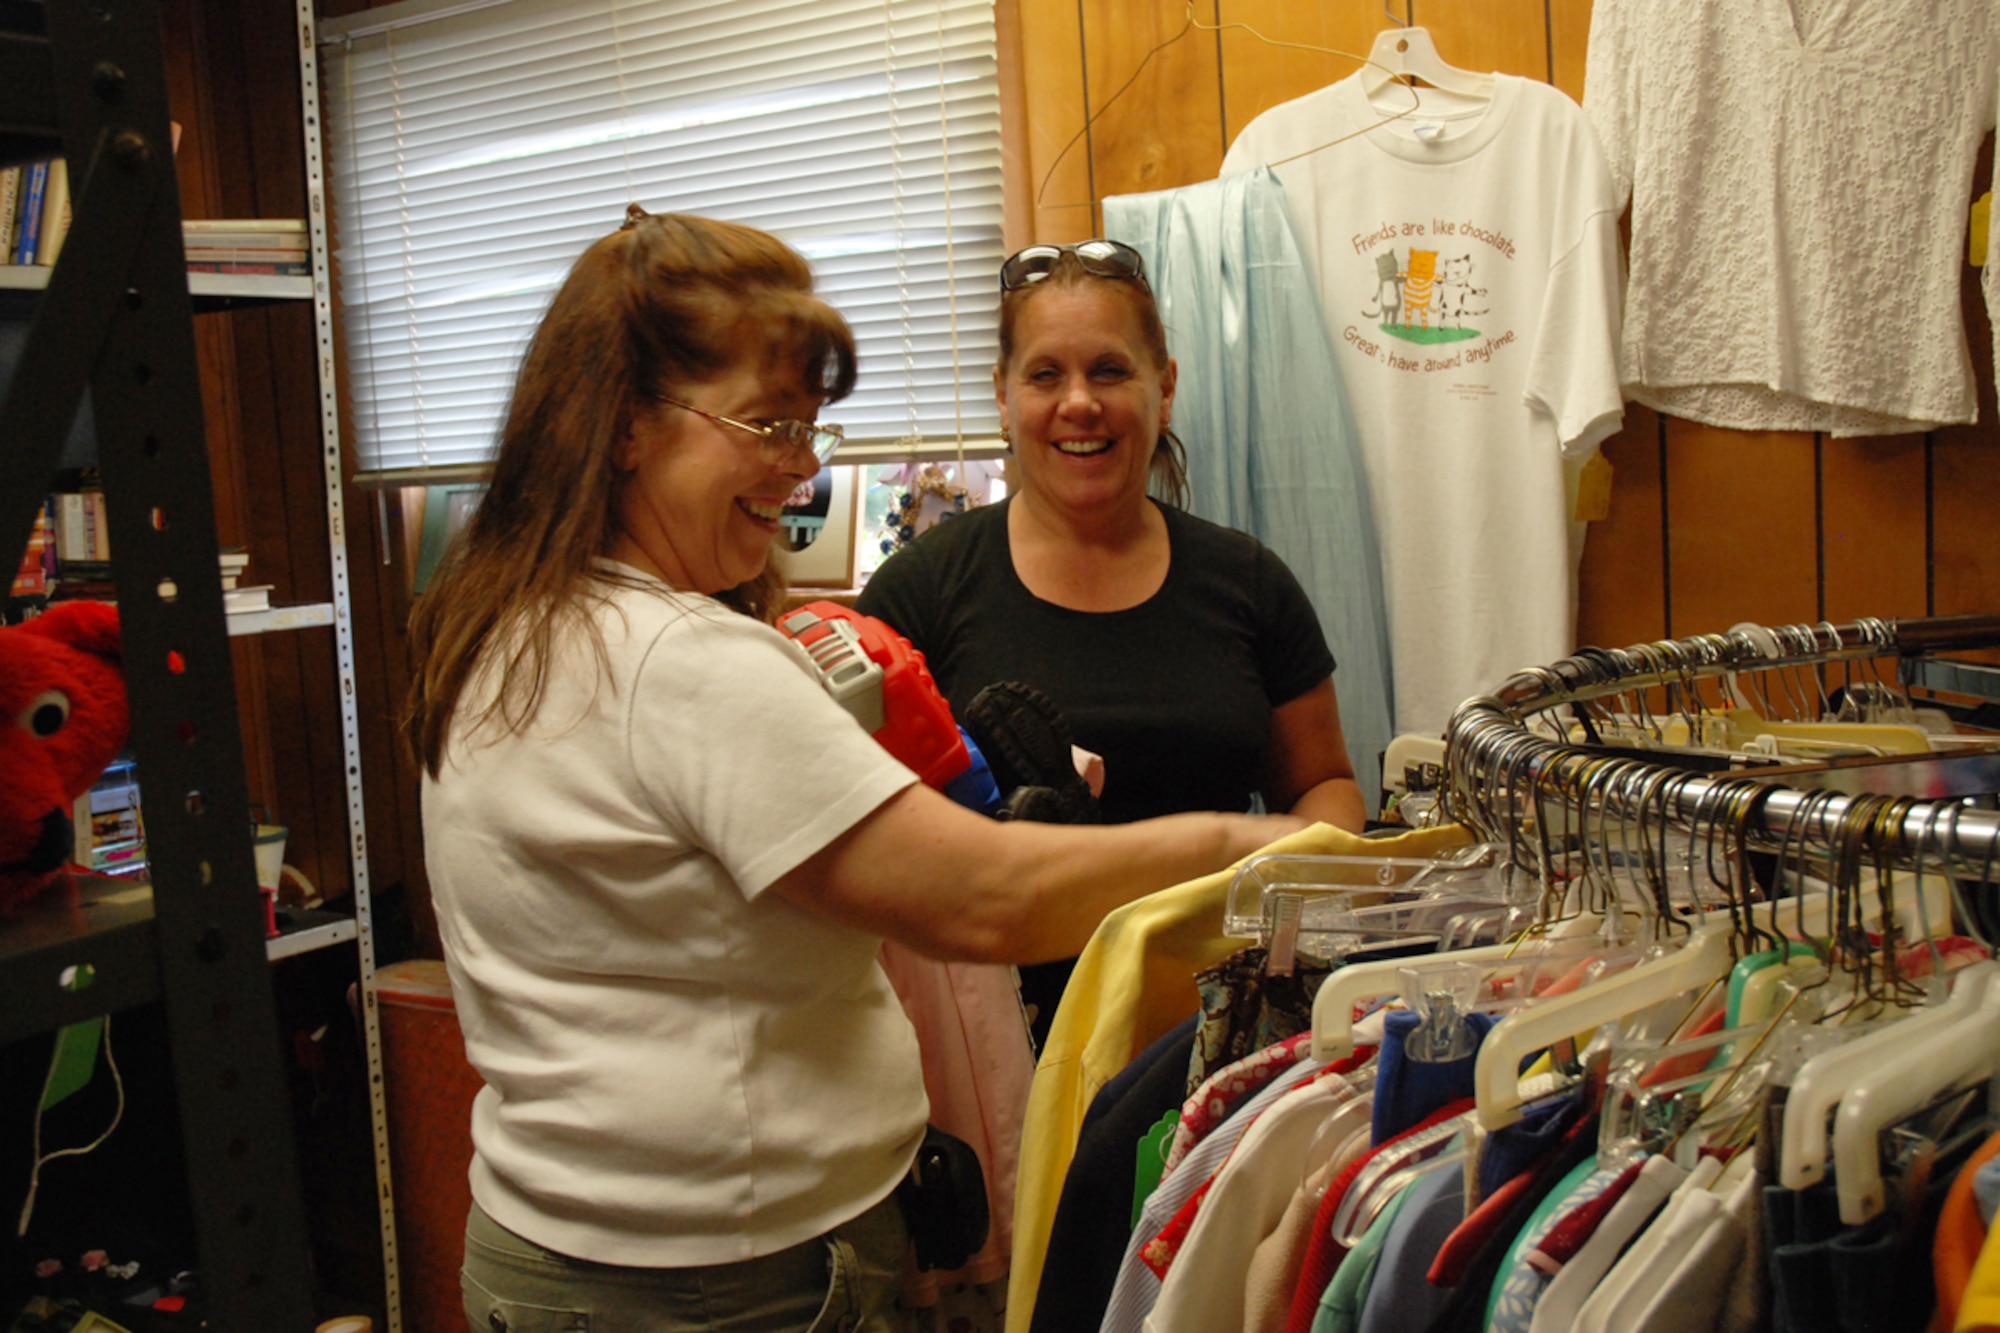 Thrift store offers treasures at bargain prices > Dobbins Air Reserve Base  > Article Display